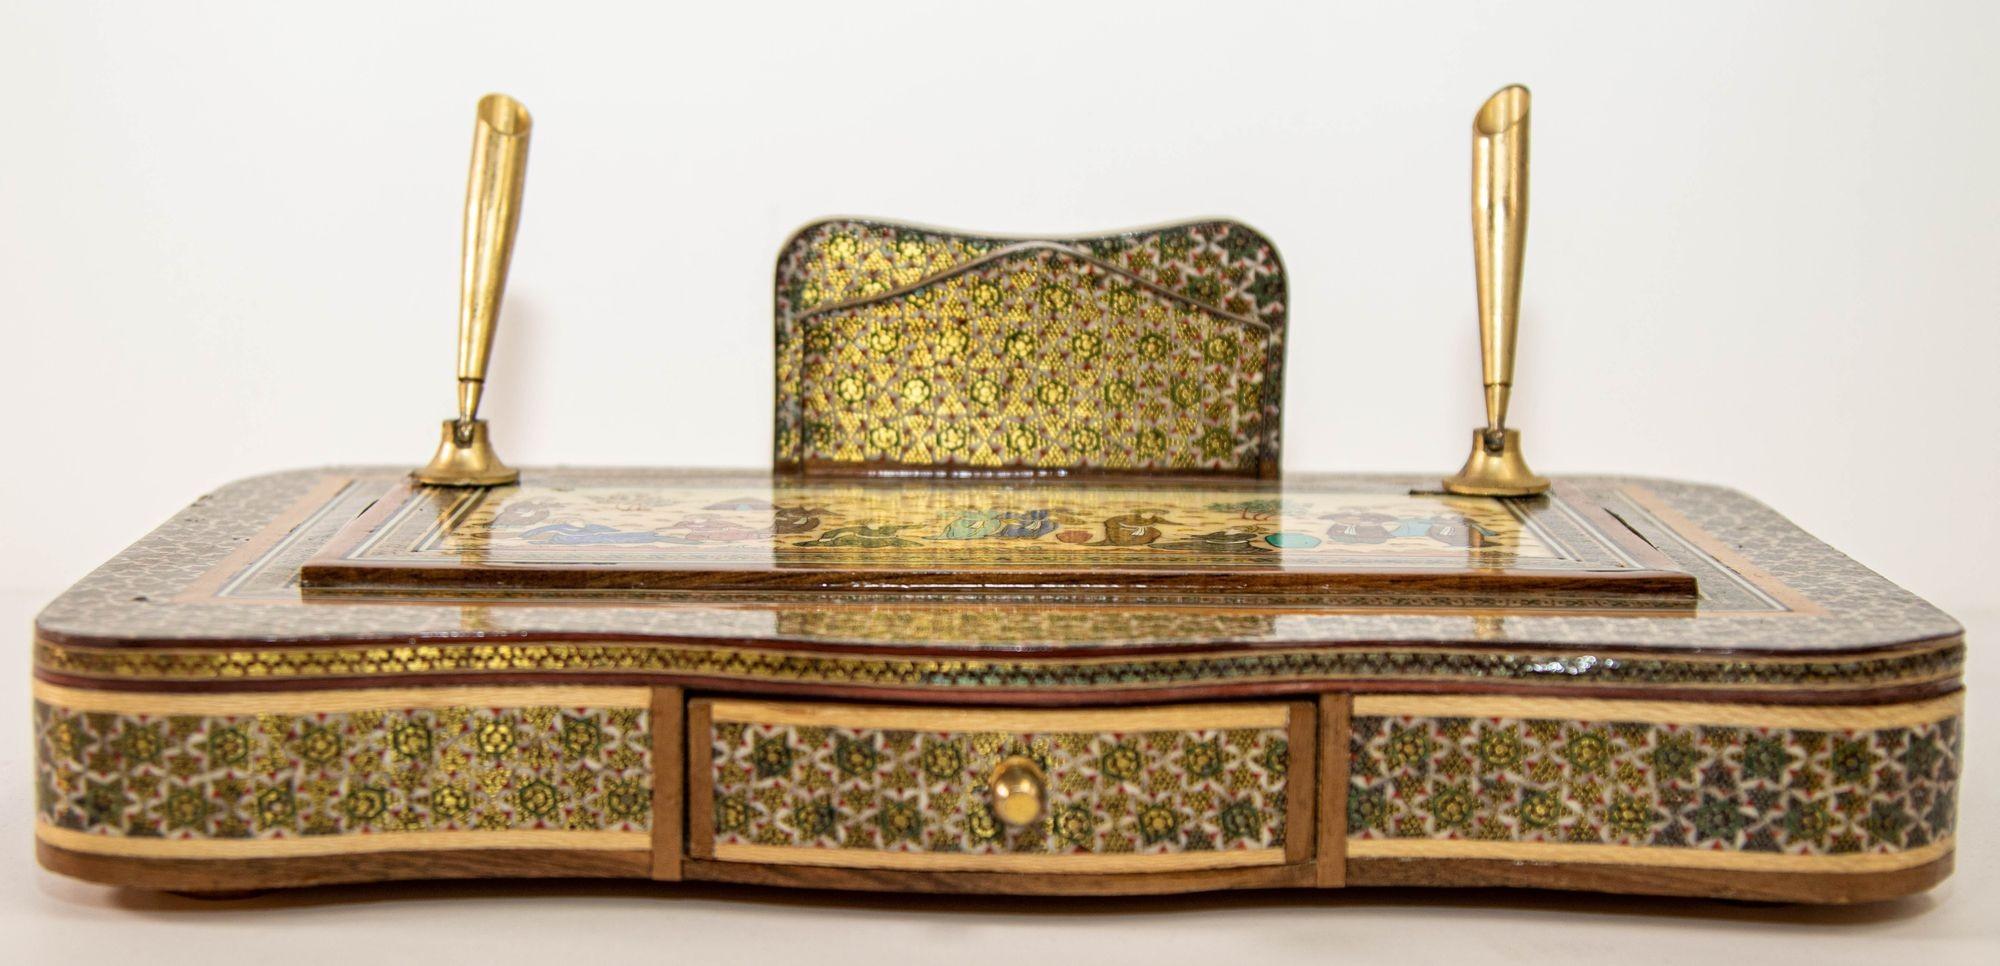 Vintage 1950s Persian Khatam desk set in solid wood Mosaic inlay with brass tips pen holder.
The wooden base is khatam covered and there is a miniature painting scene in the top flat surface of young people, girls and boys wearing period costumes